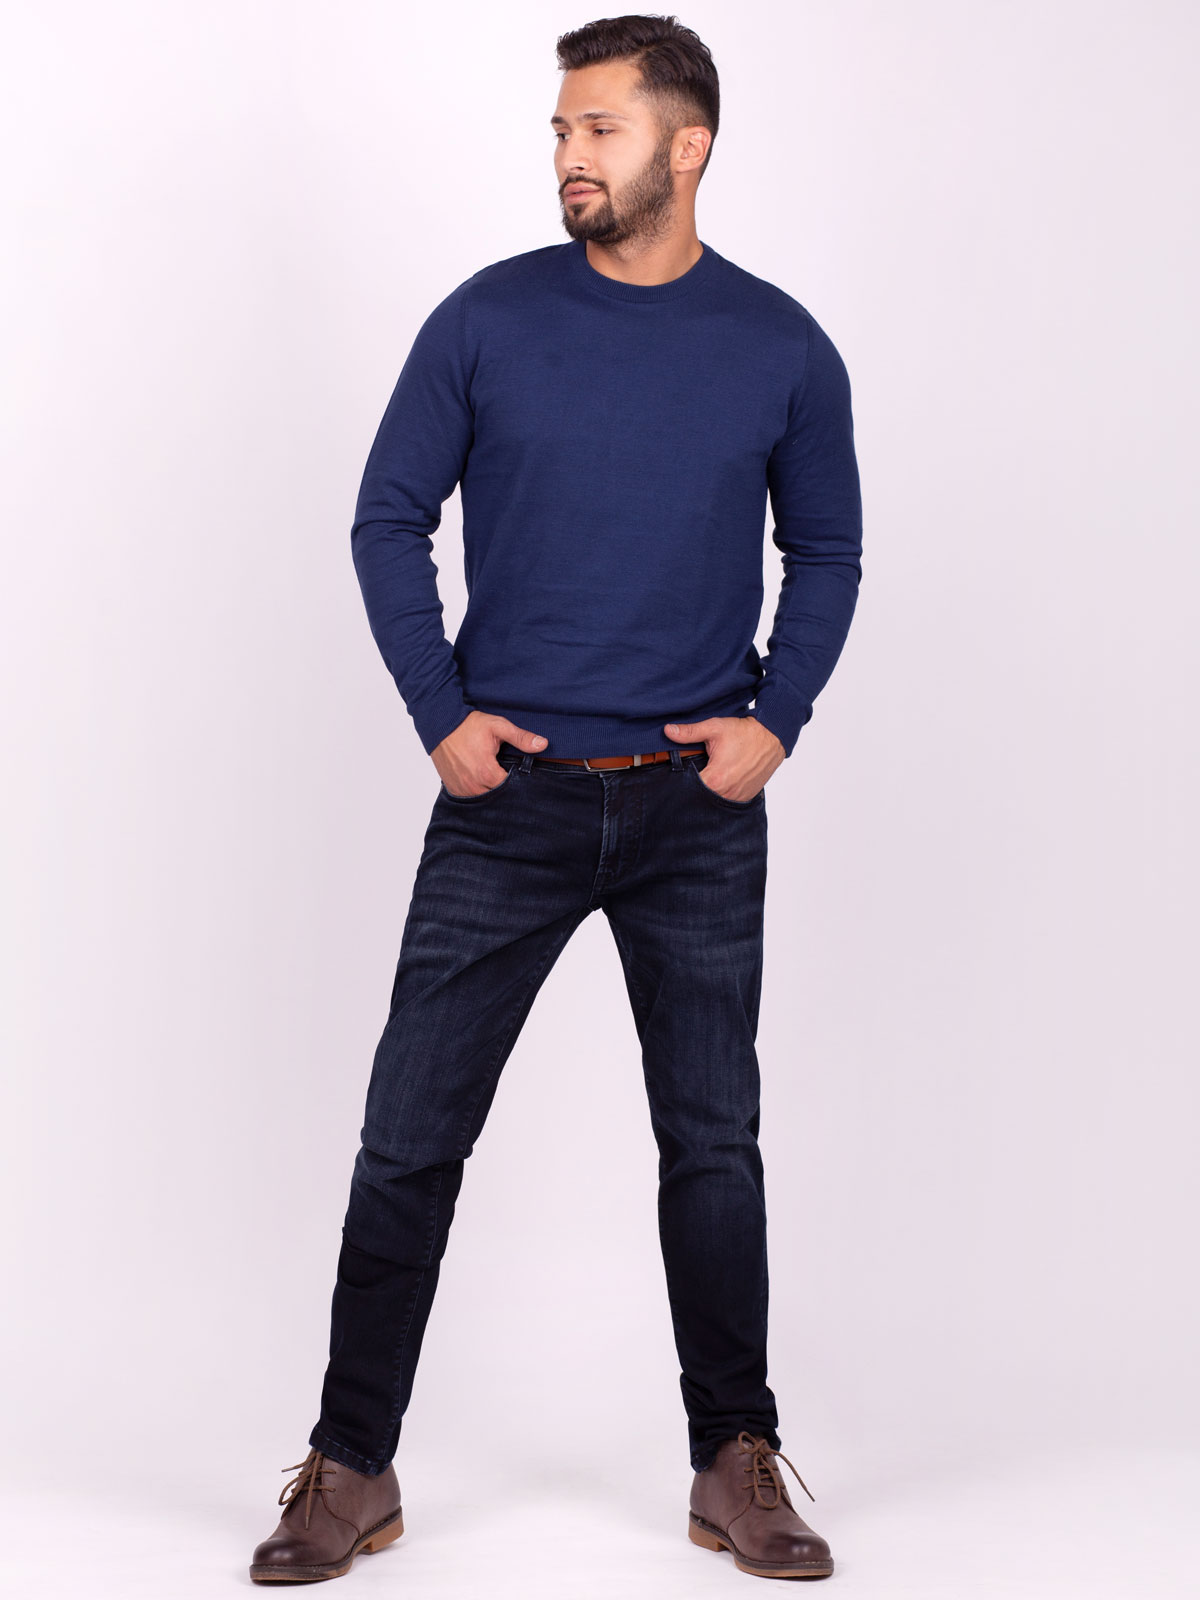 Ink blue sweater - 35299 € 37.12 img2